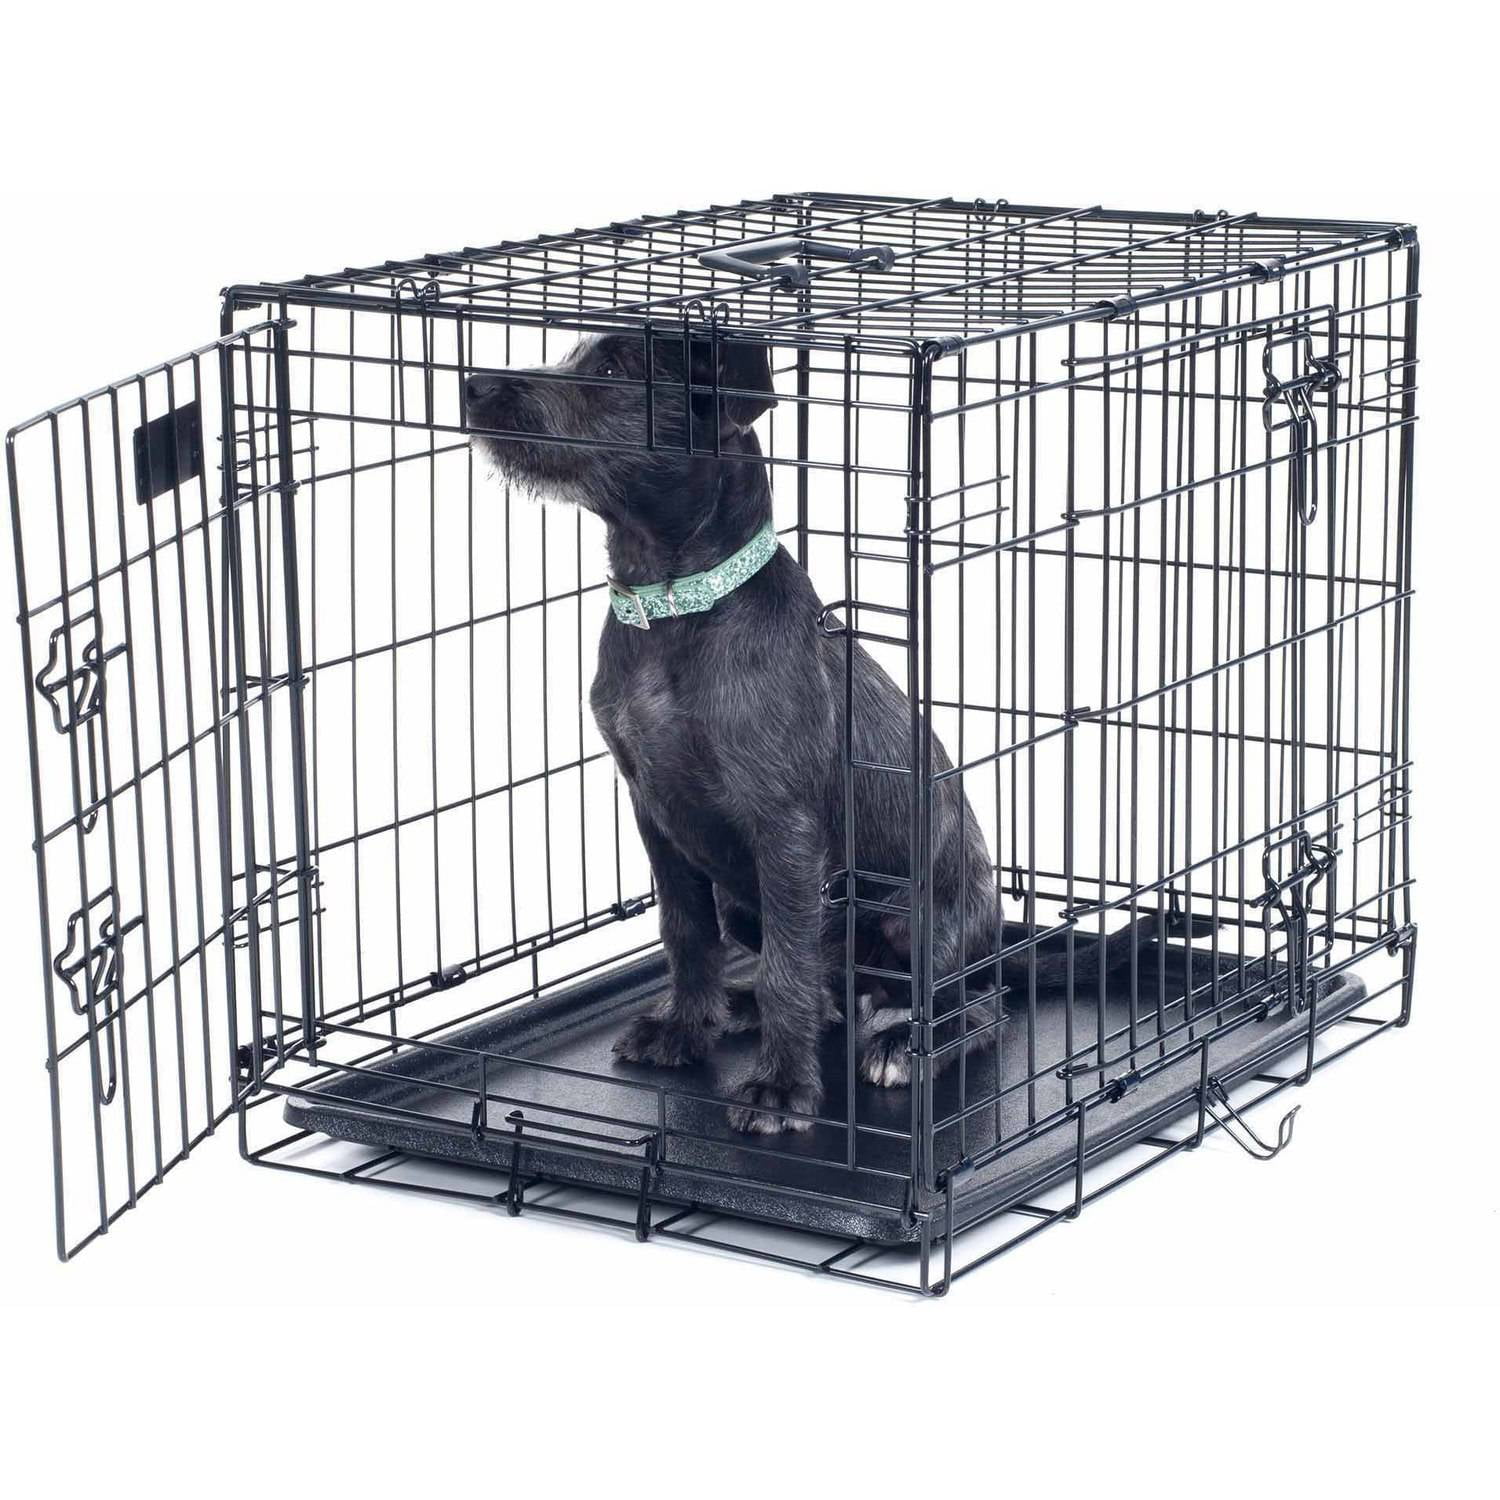 Ellie-Bo Dog Puppy Cage Folding 2 Door Crate with Non-Chew Metal Tray Silver 30 Inch Medium